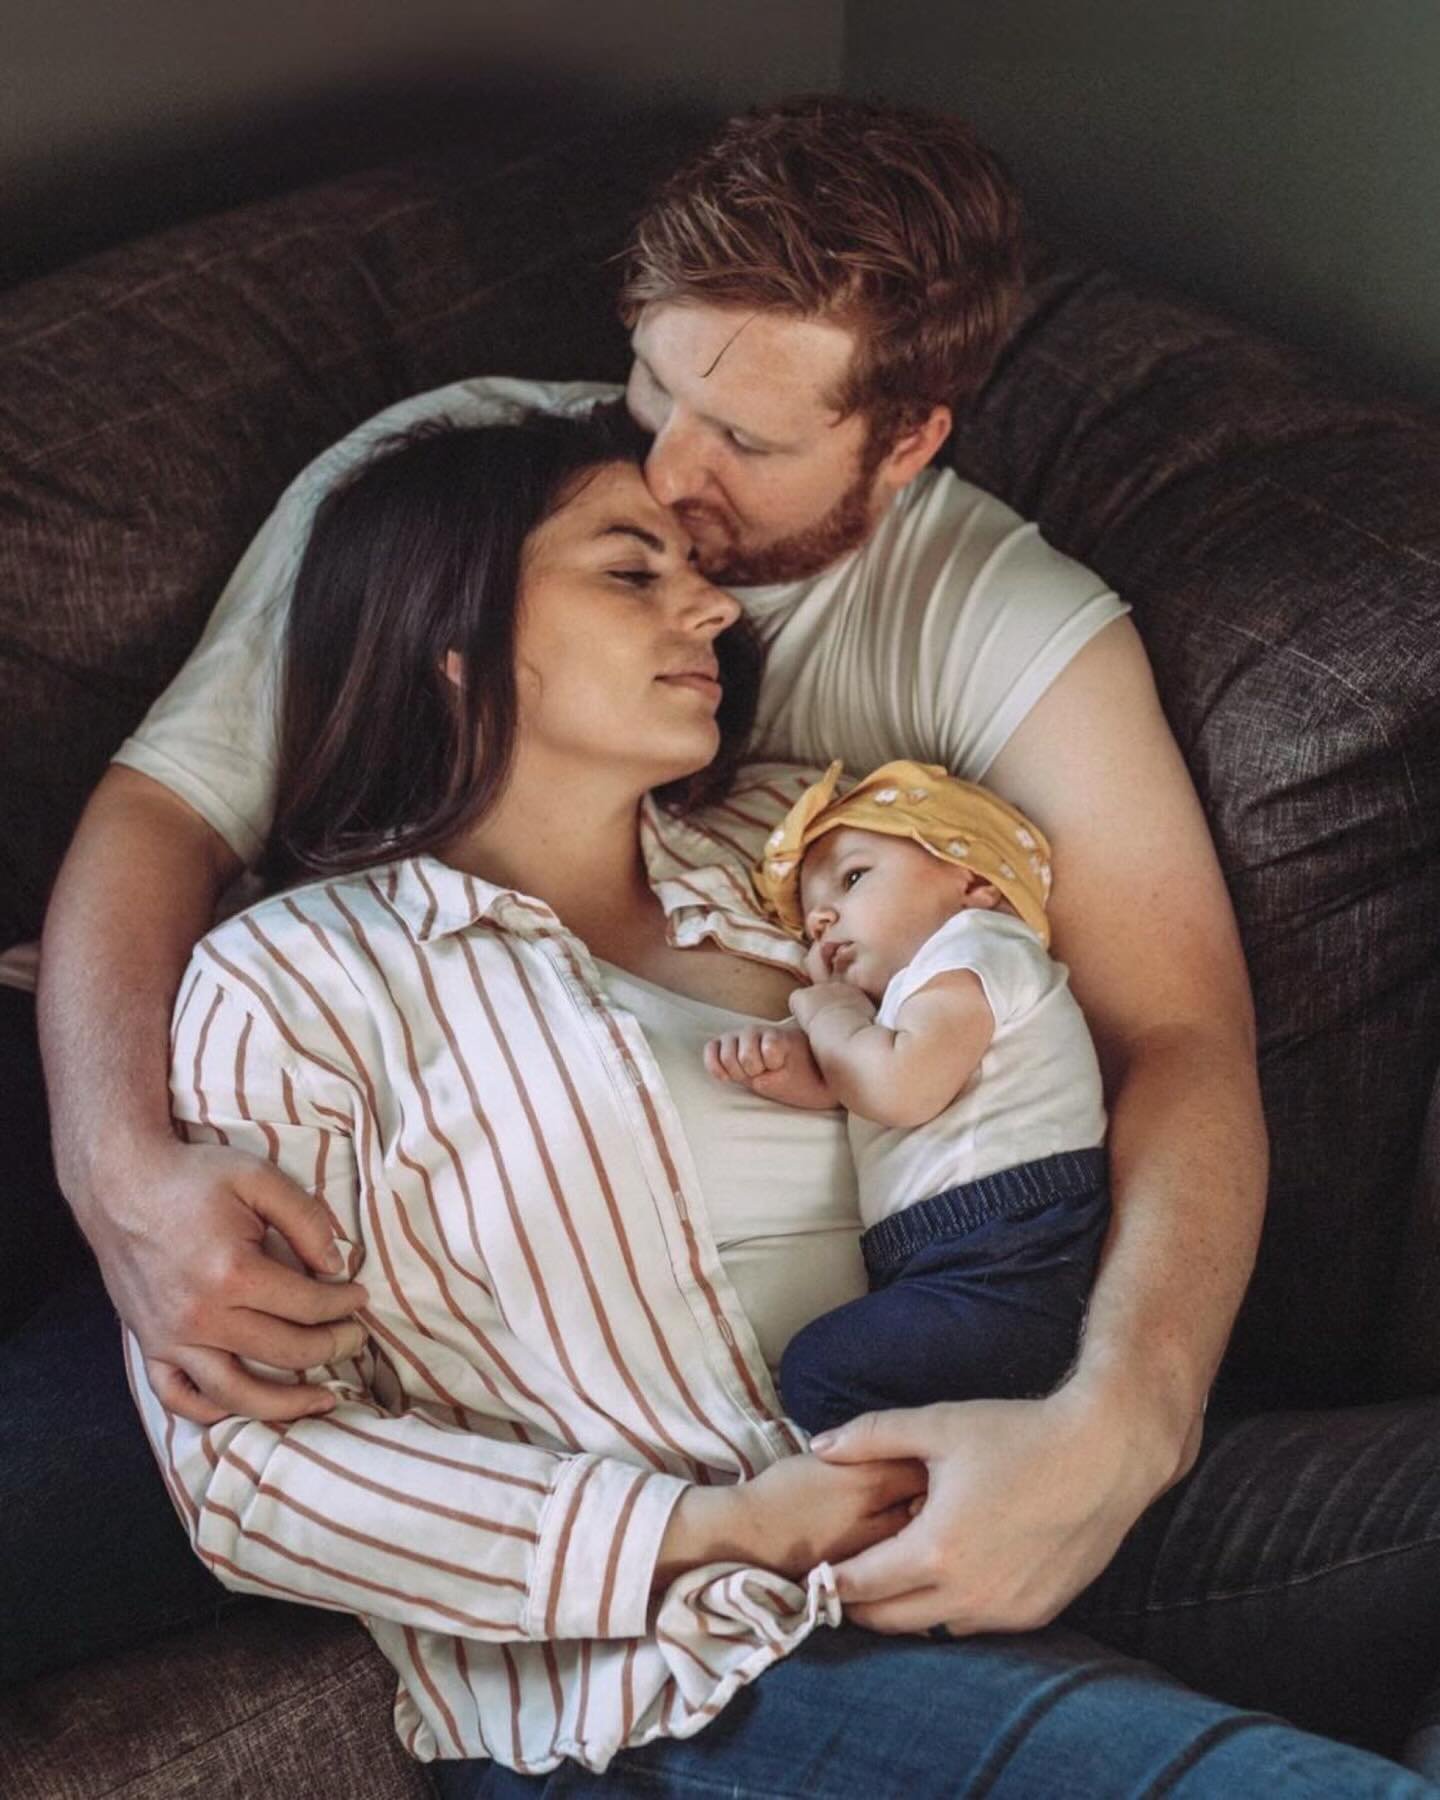 It doesn&rsquo;t get better than capturing a maternity session with a sweet, beautiful family and then getting to witness the outpouring of love for their new baby girl.

You two- you&rsquo;re making it look good.